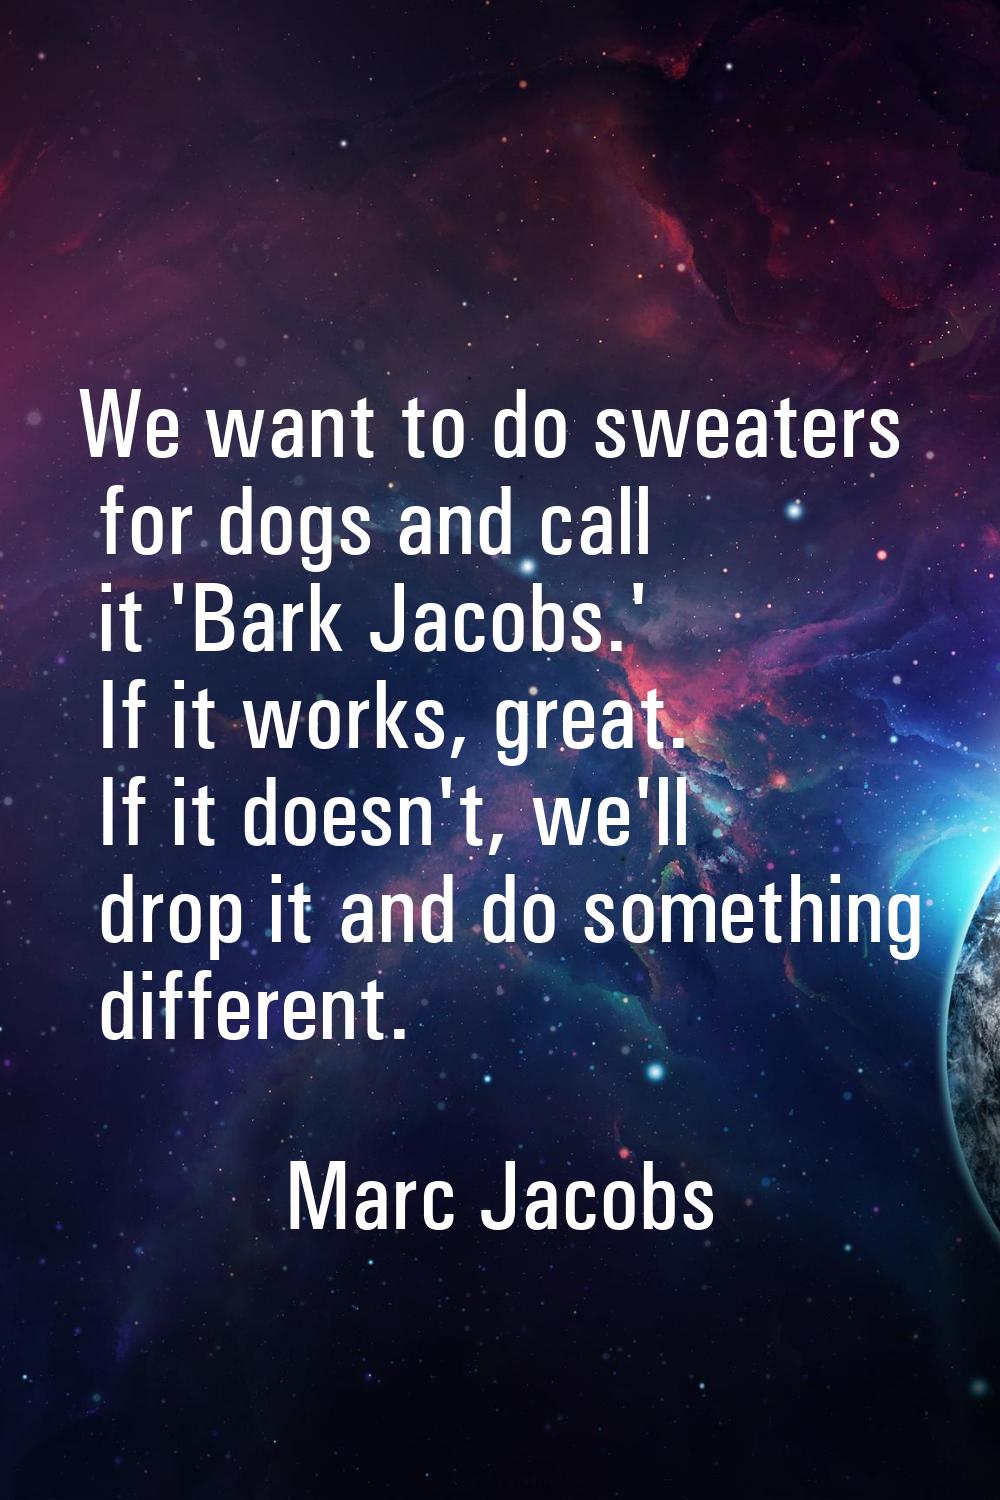 We want to do sweaters for dogs and call it 'Bark Jacobs.' If it works, great. If it doesn't, we'll